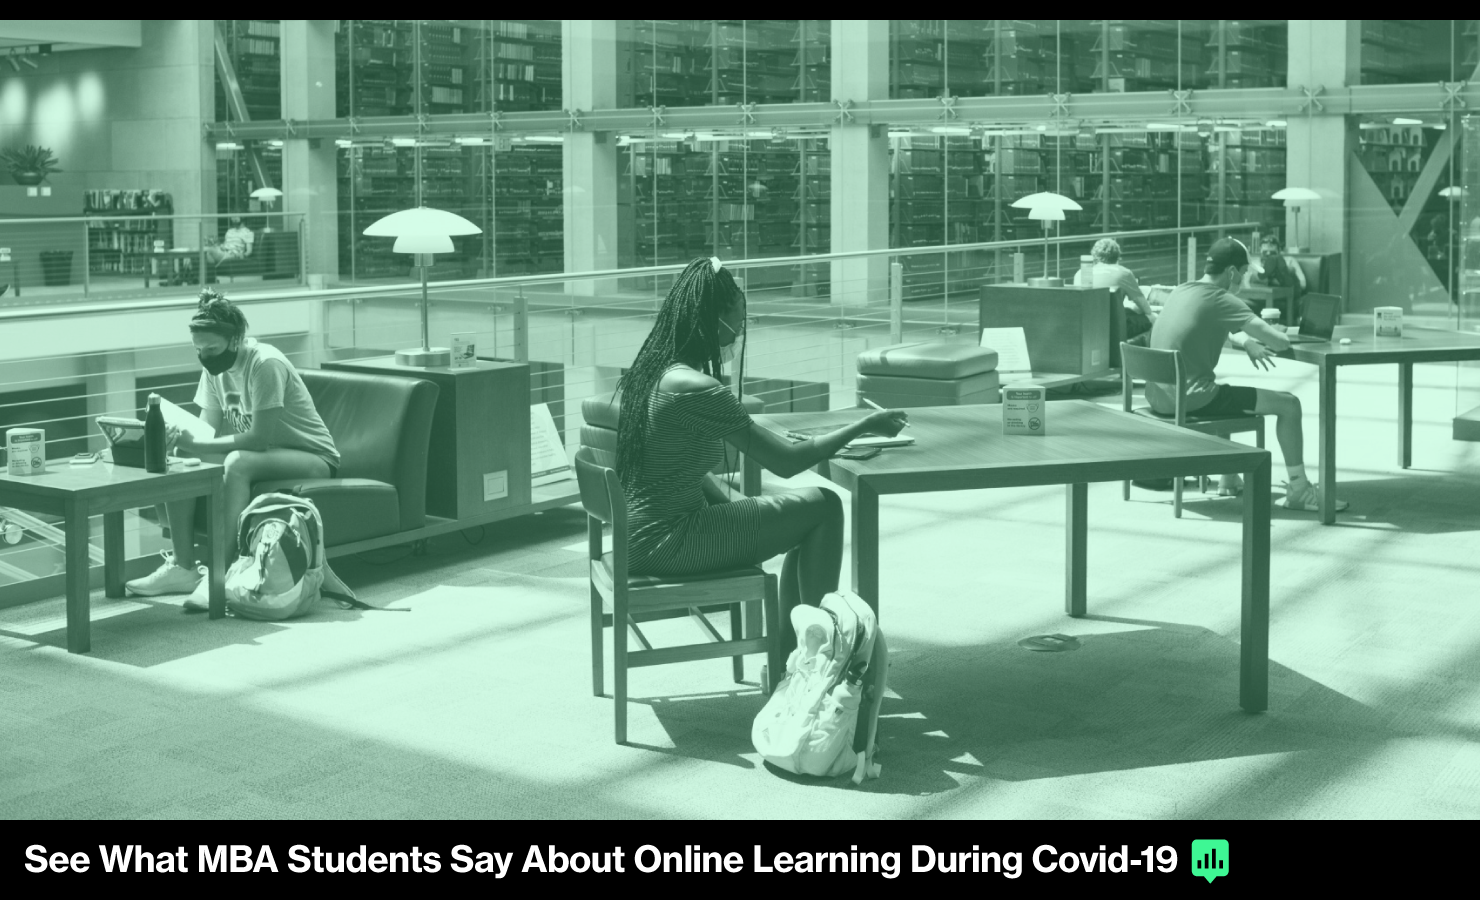 relates to MBA Students Get Thrown Off Course by Shift to Online Learning